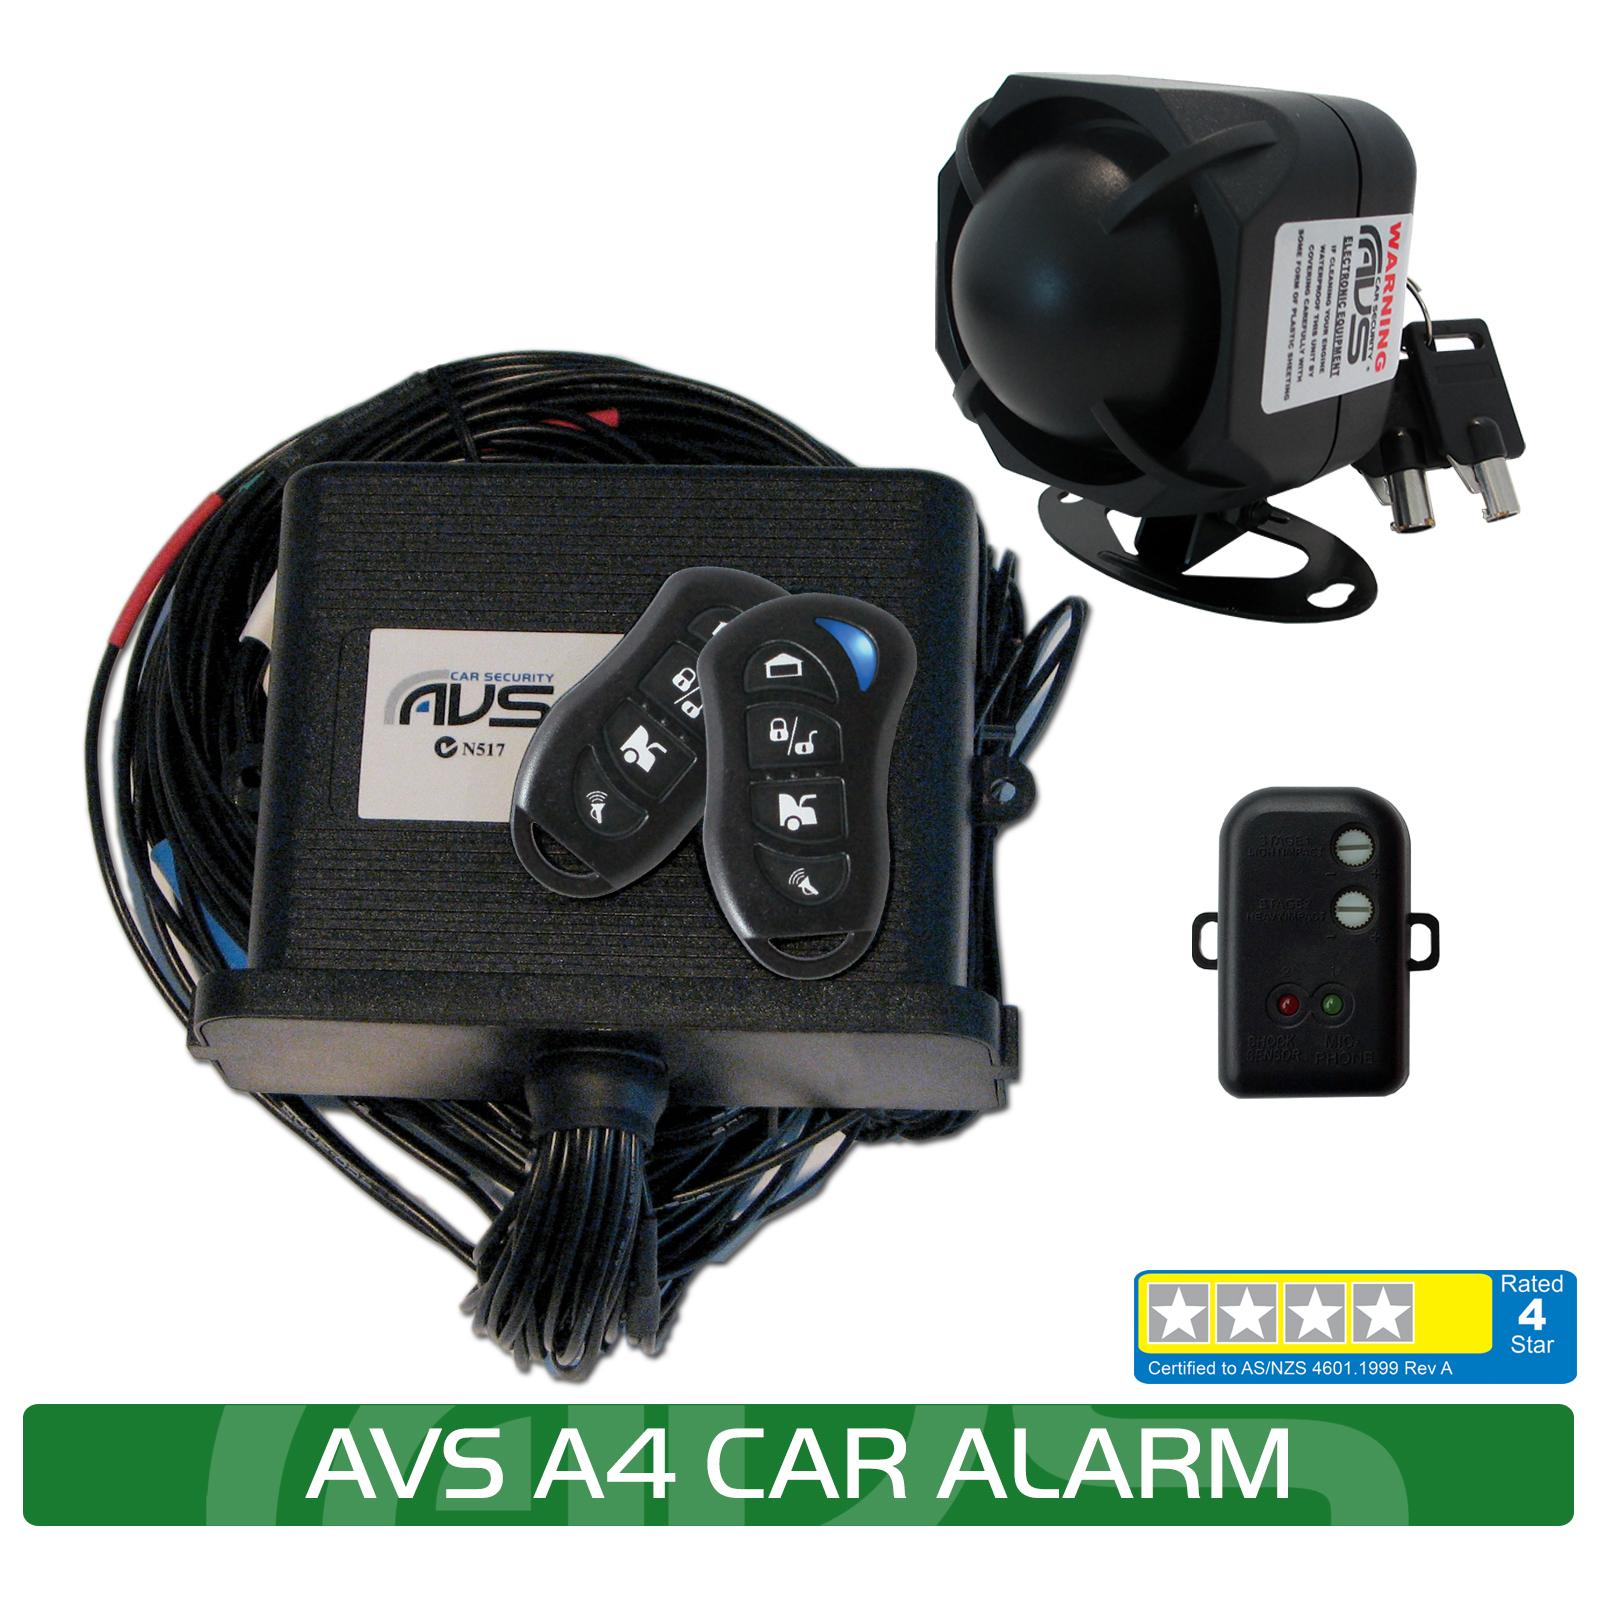 Product AVS A4 Fully Featured 4 Star Insurance Approved Alarm System - Fitted - Sound Around image